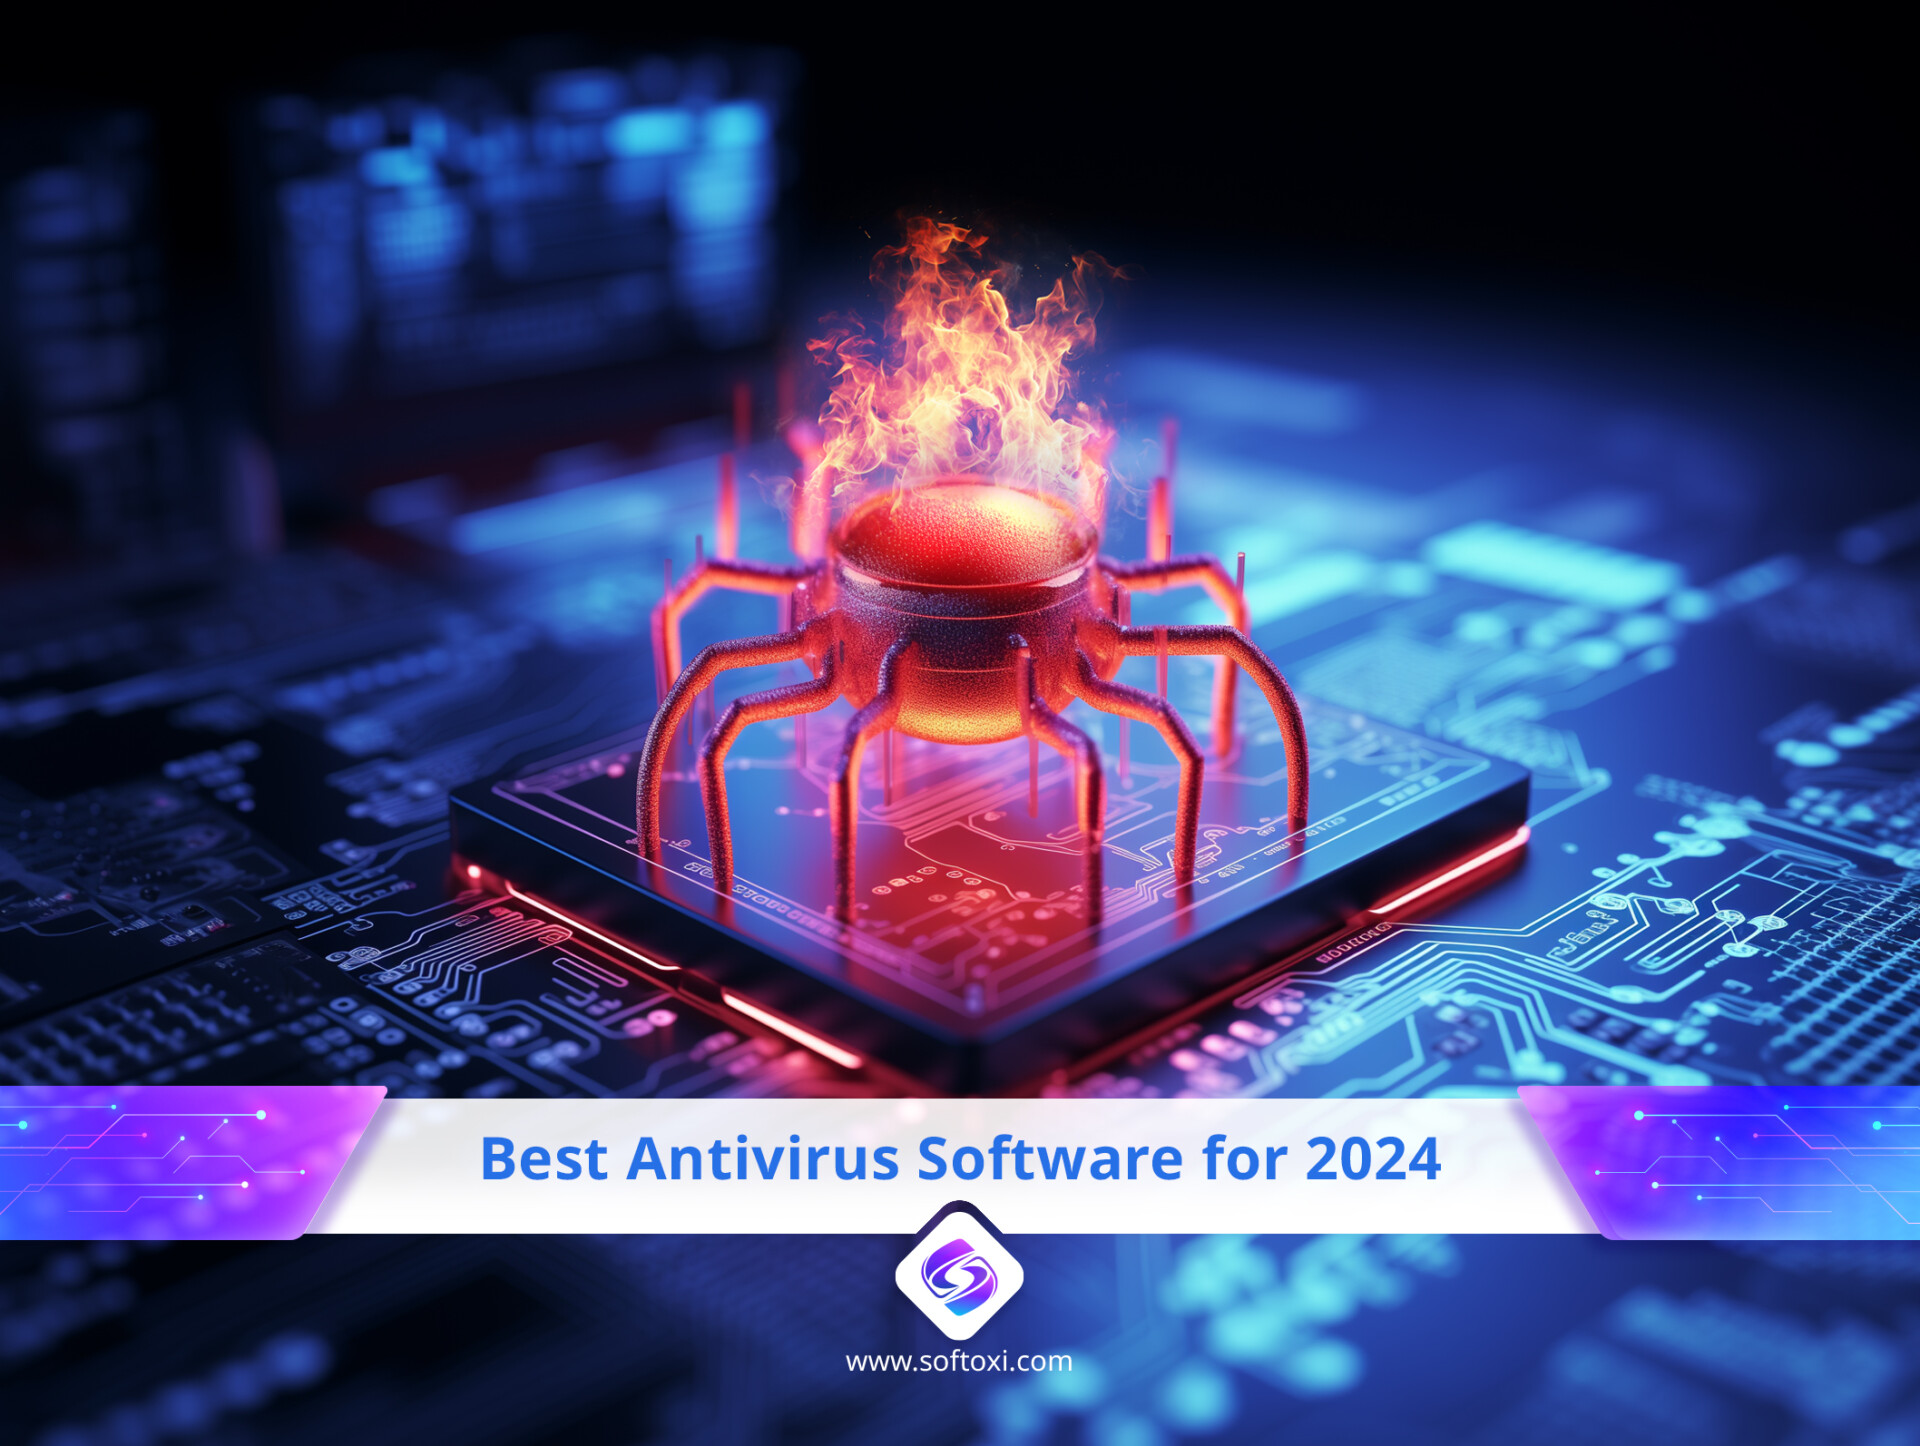 Best Antivirus Software for 2024 Comprehensive Guide to Protecting